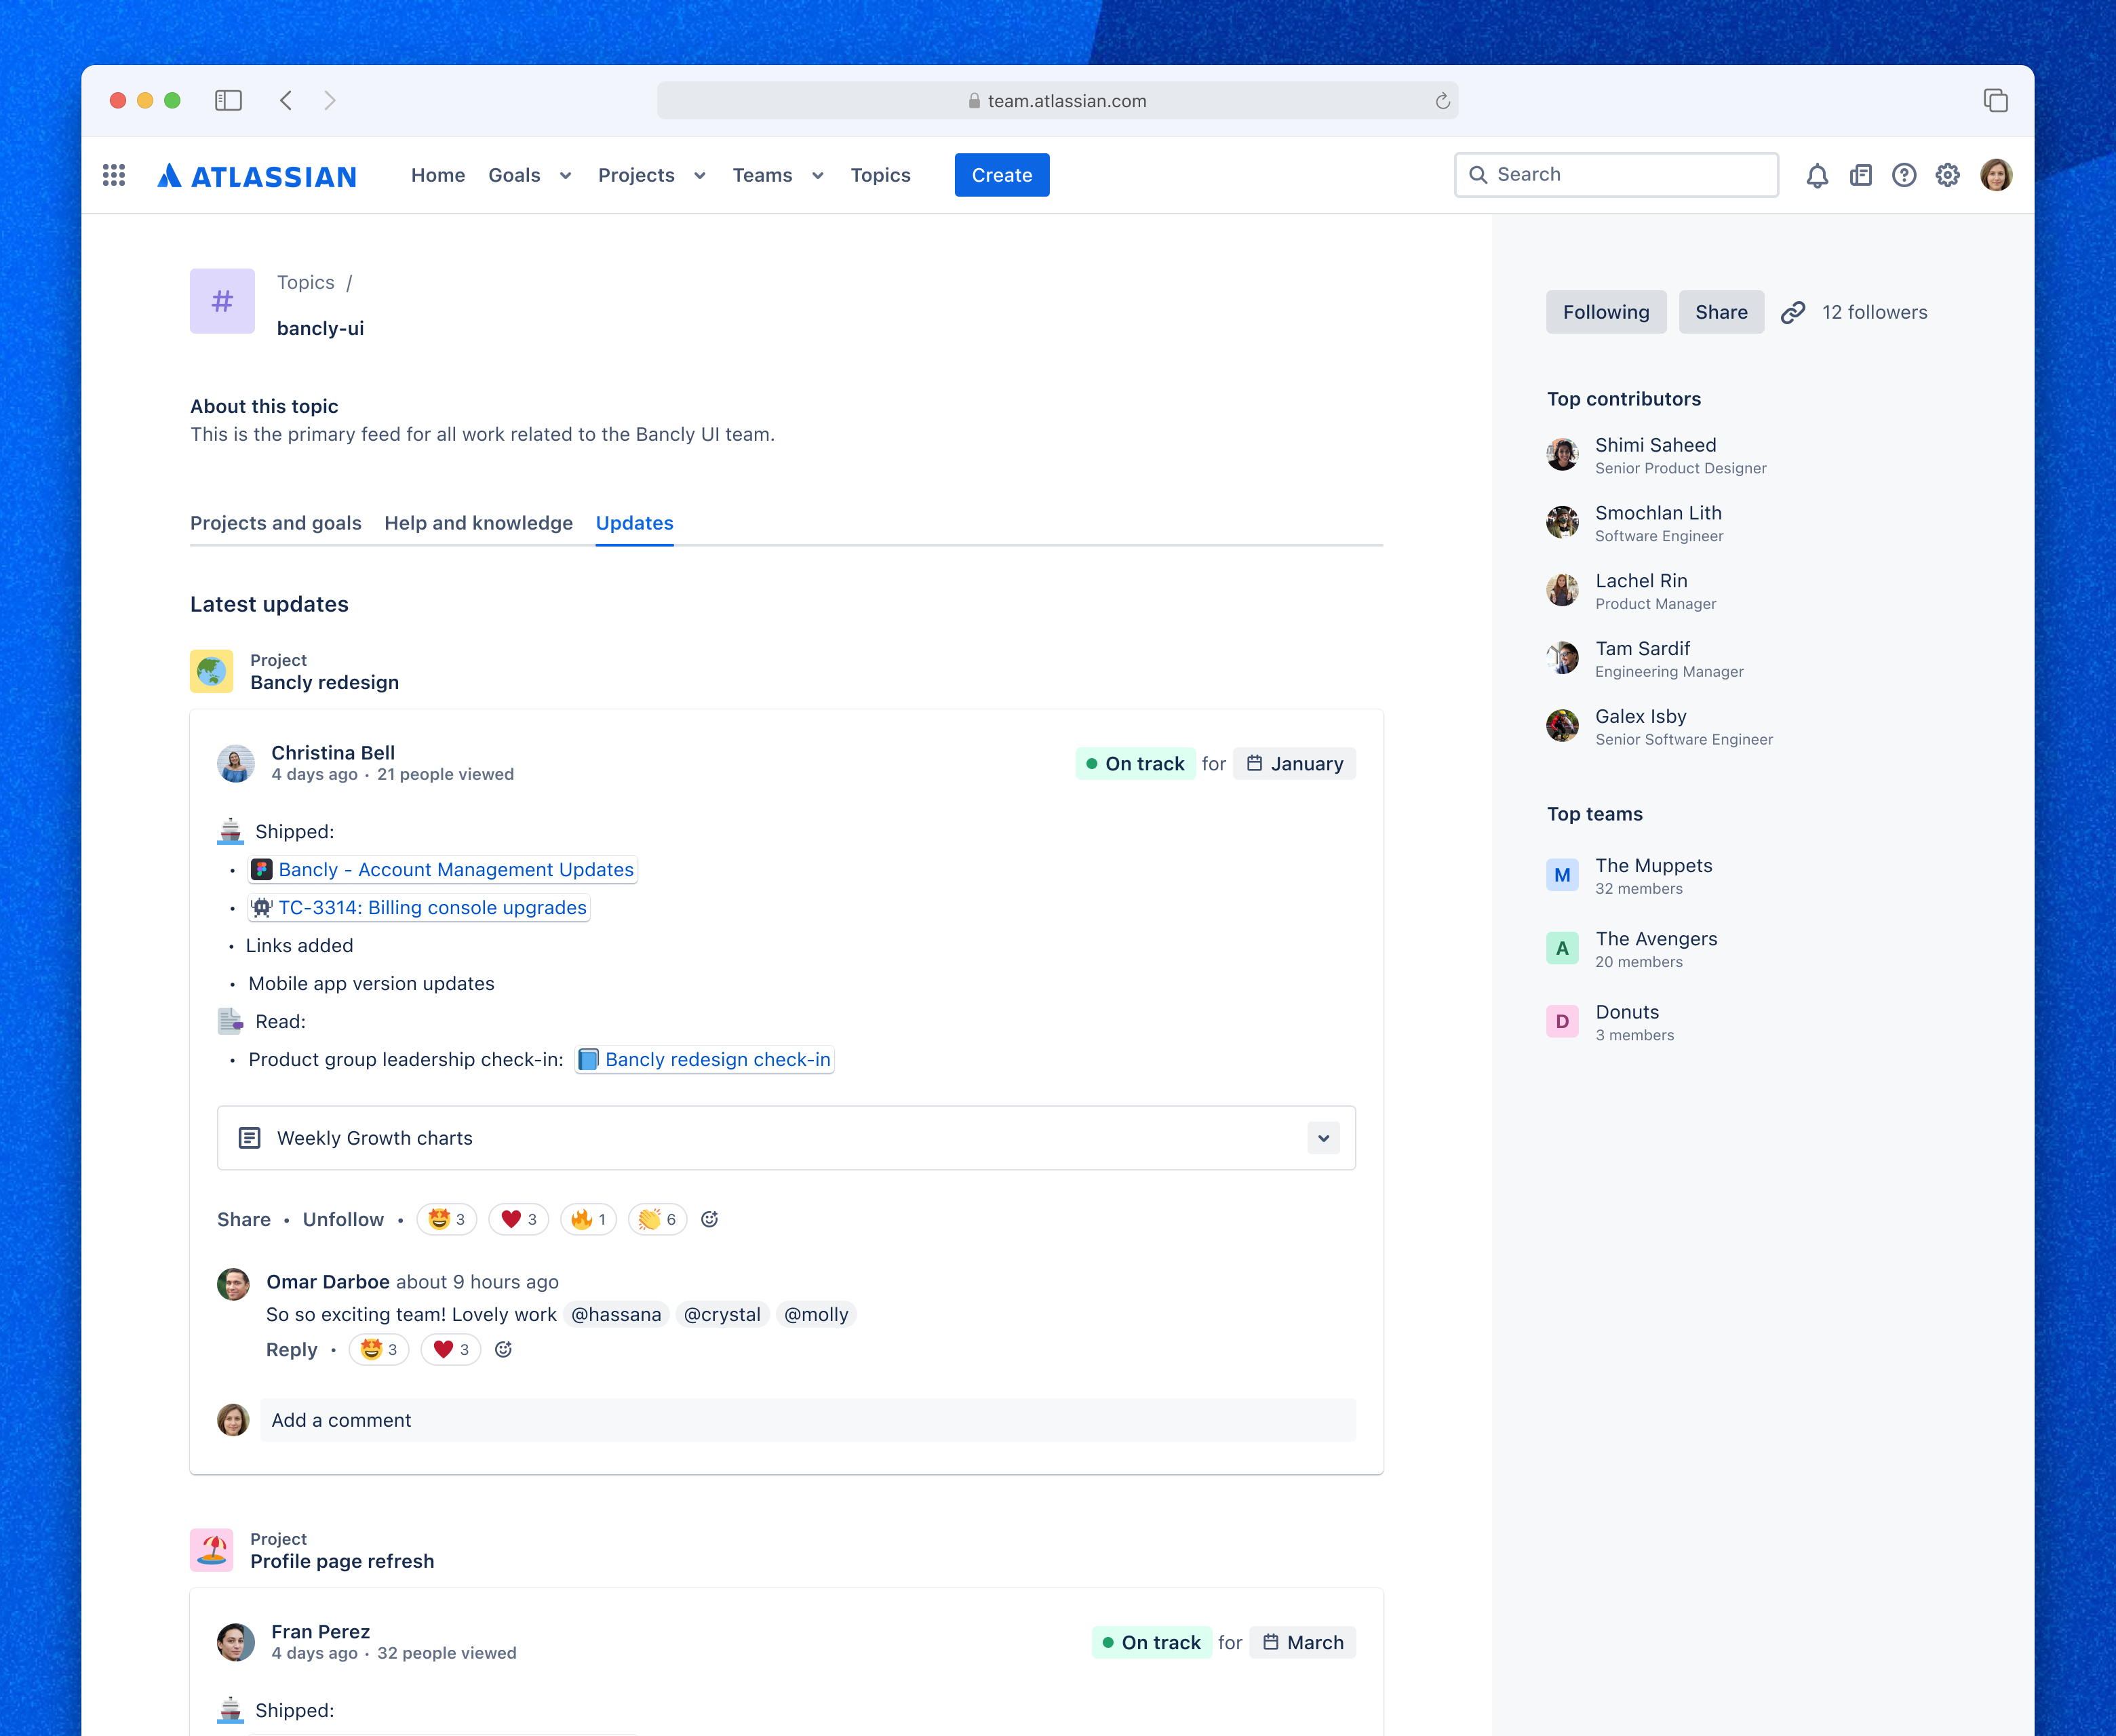 The update feed on a topic page in Atlassian Home.